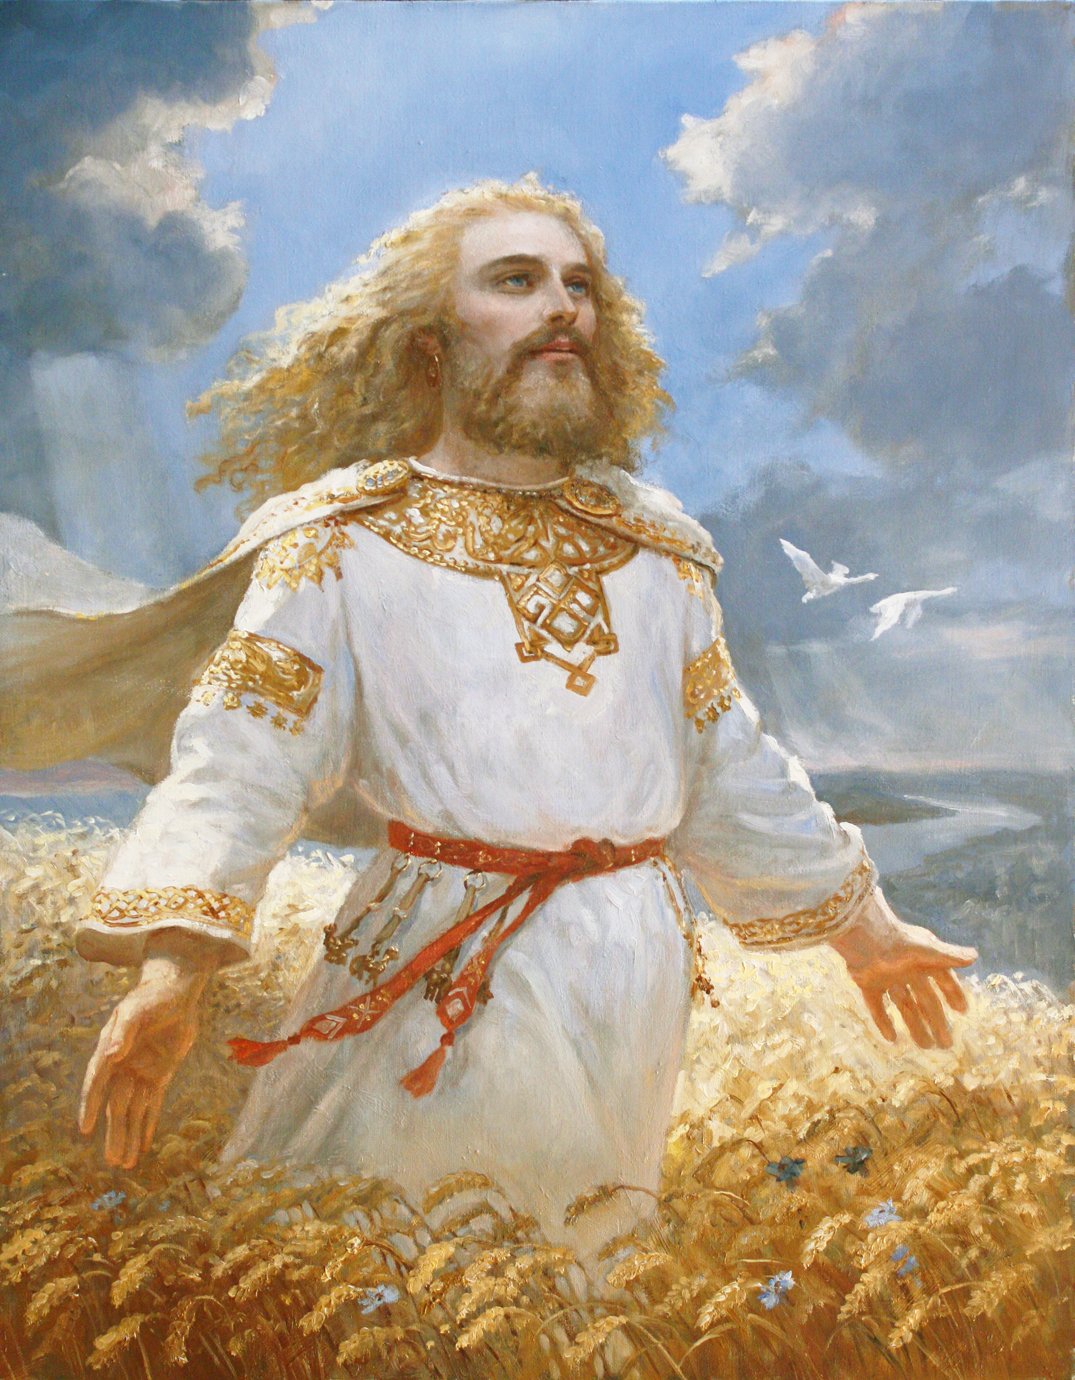 A painting of Dazhbog, a Slavic deity. He is depicted as a man with long blond hair, wearing a long white and gold tunic. He is standing in the middle of a wheat field.